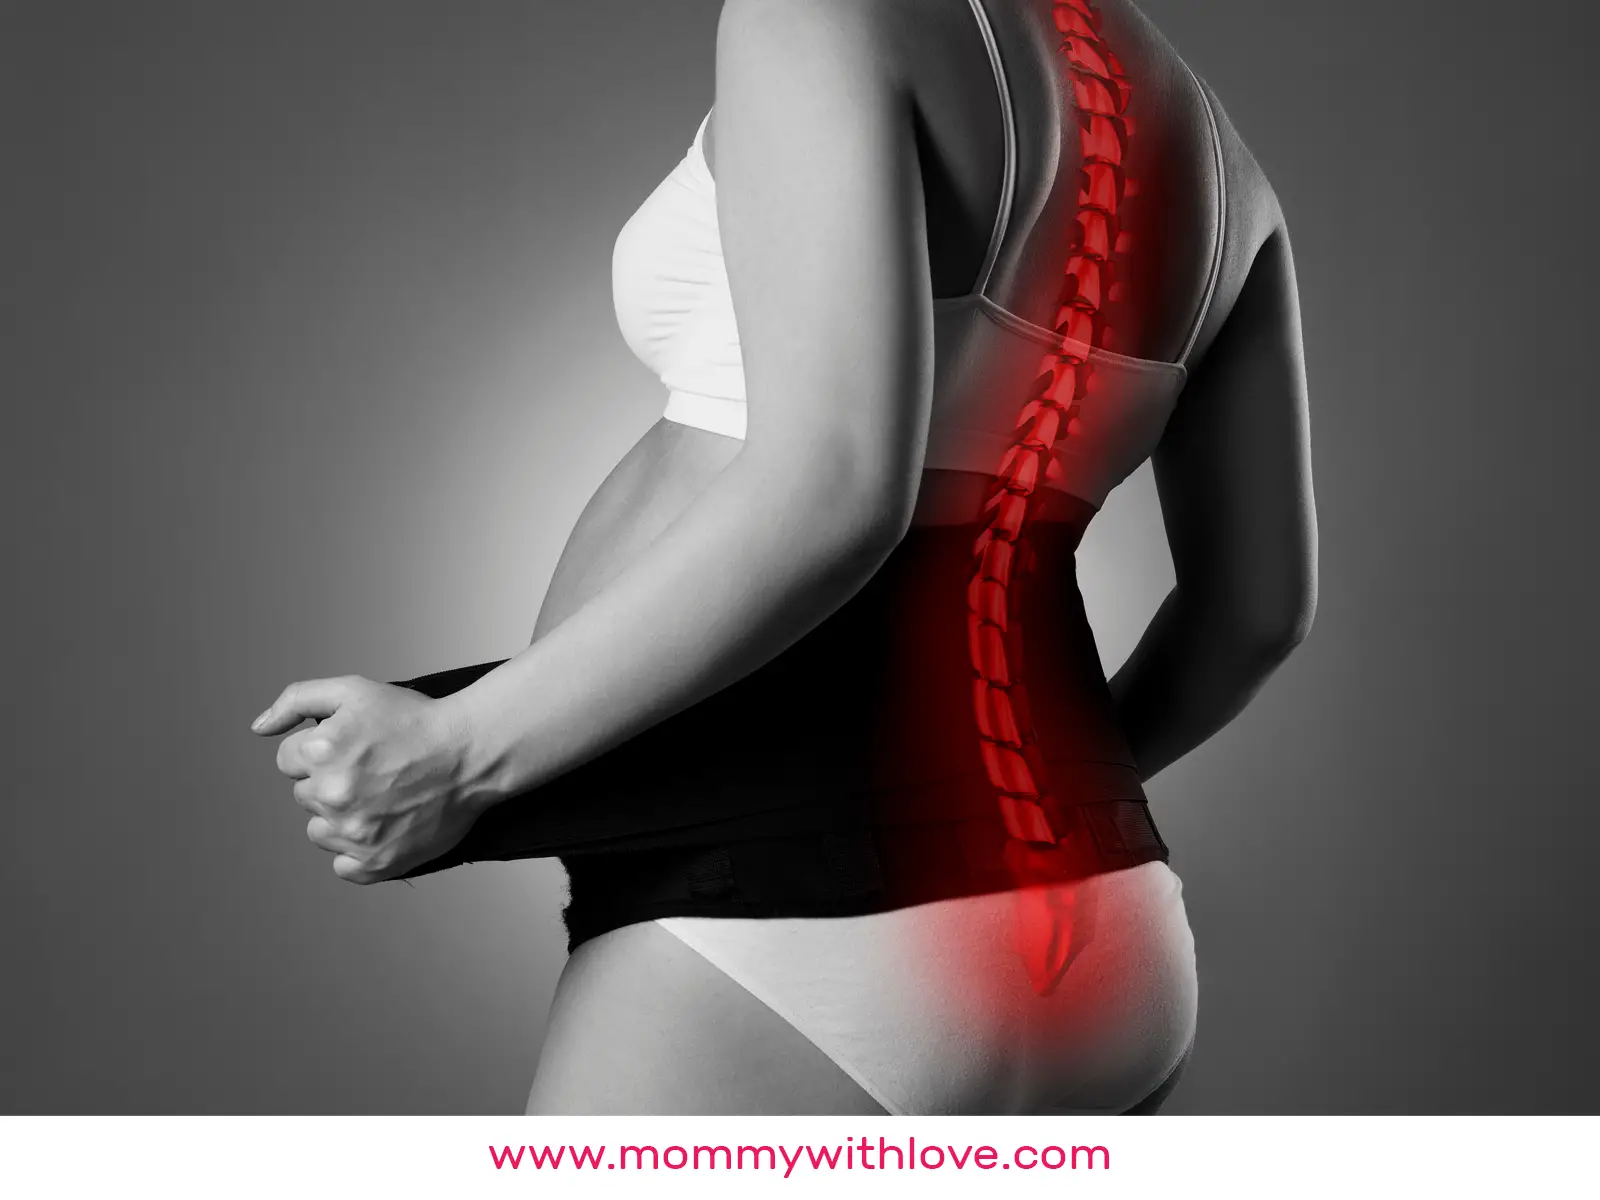 What Does It Mean When You Have Lower Back Pain While Pregnant?